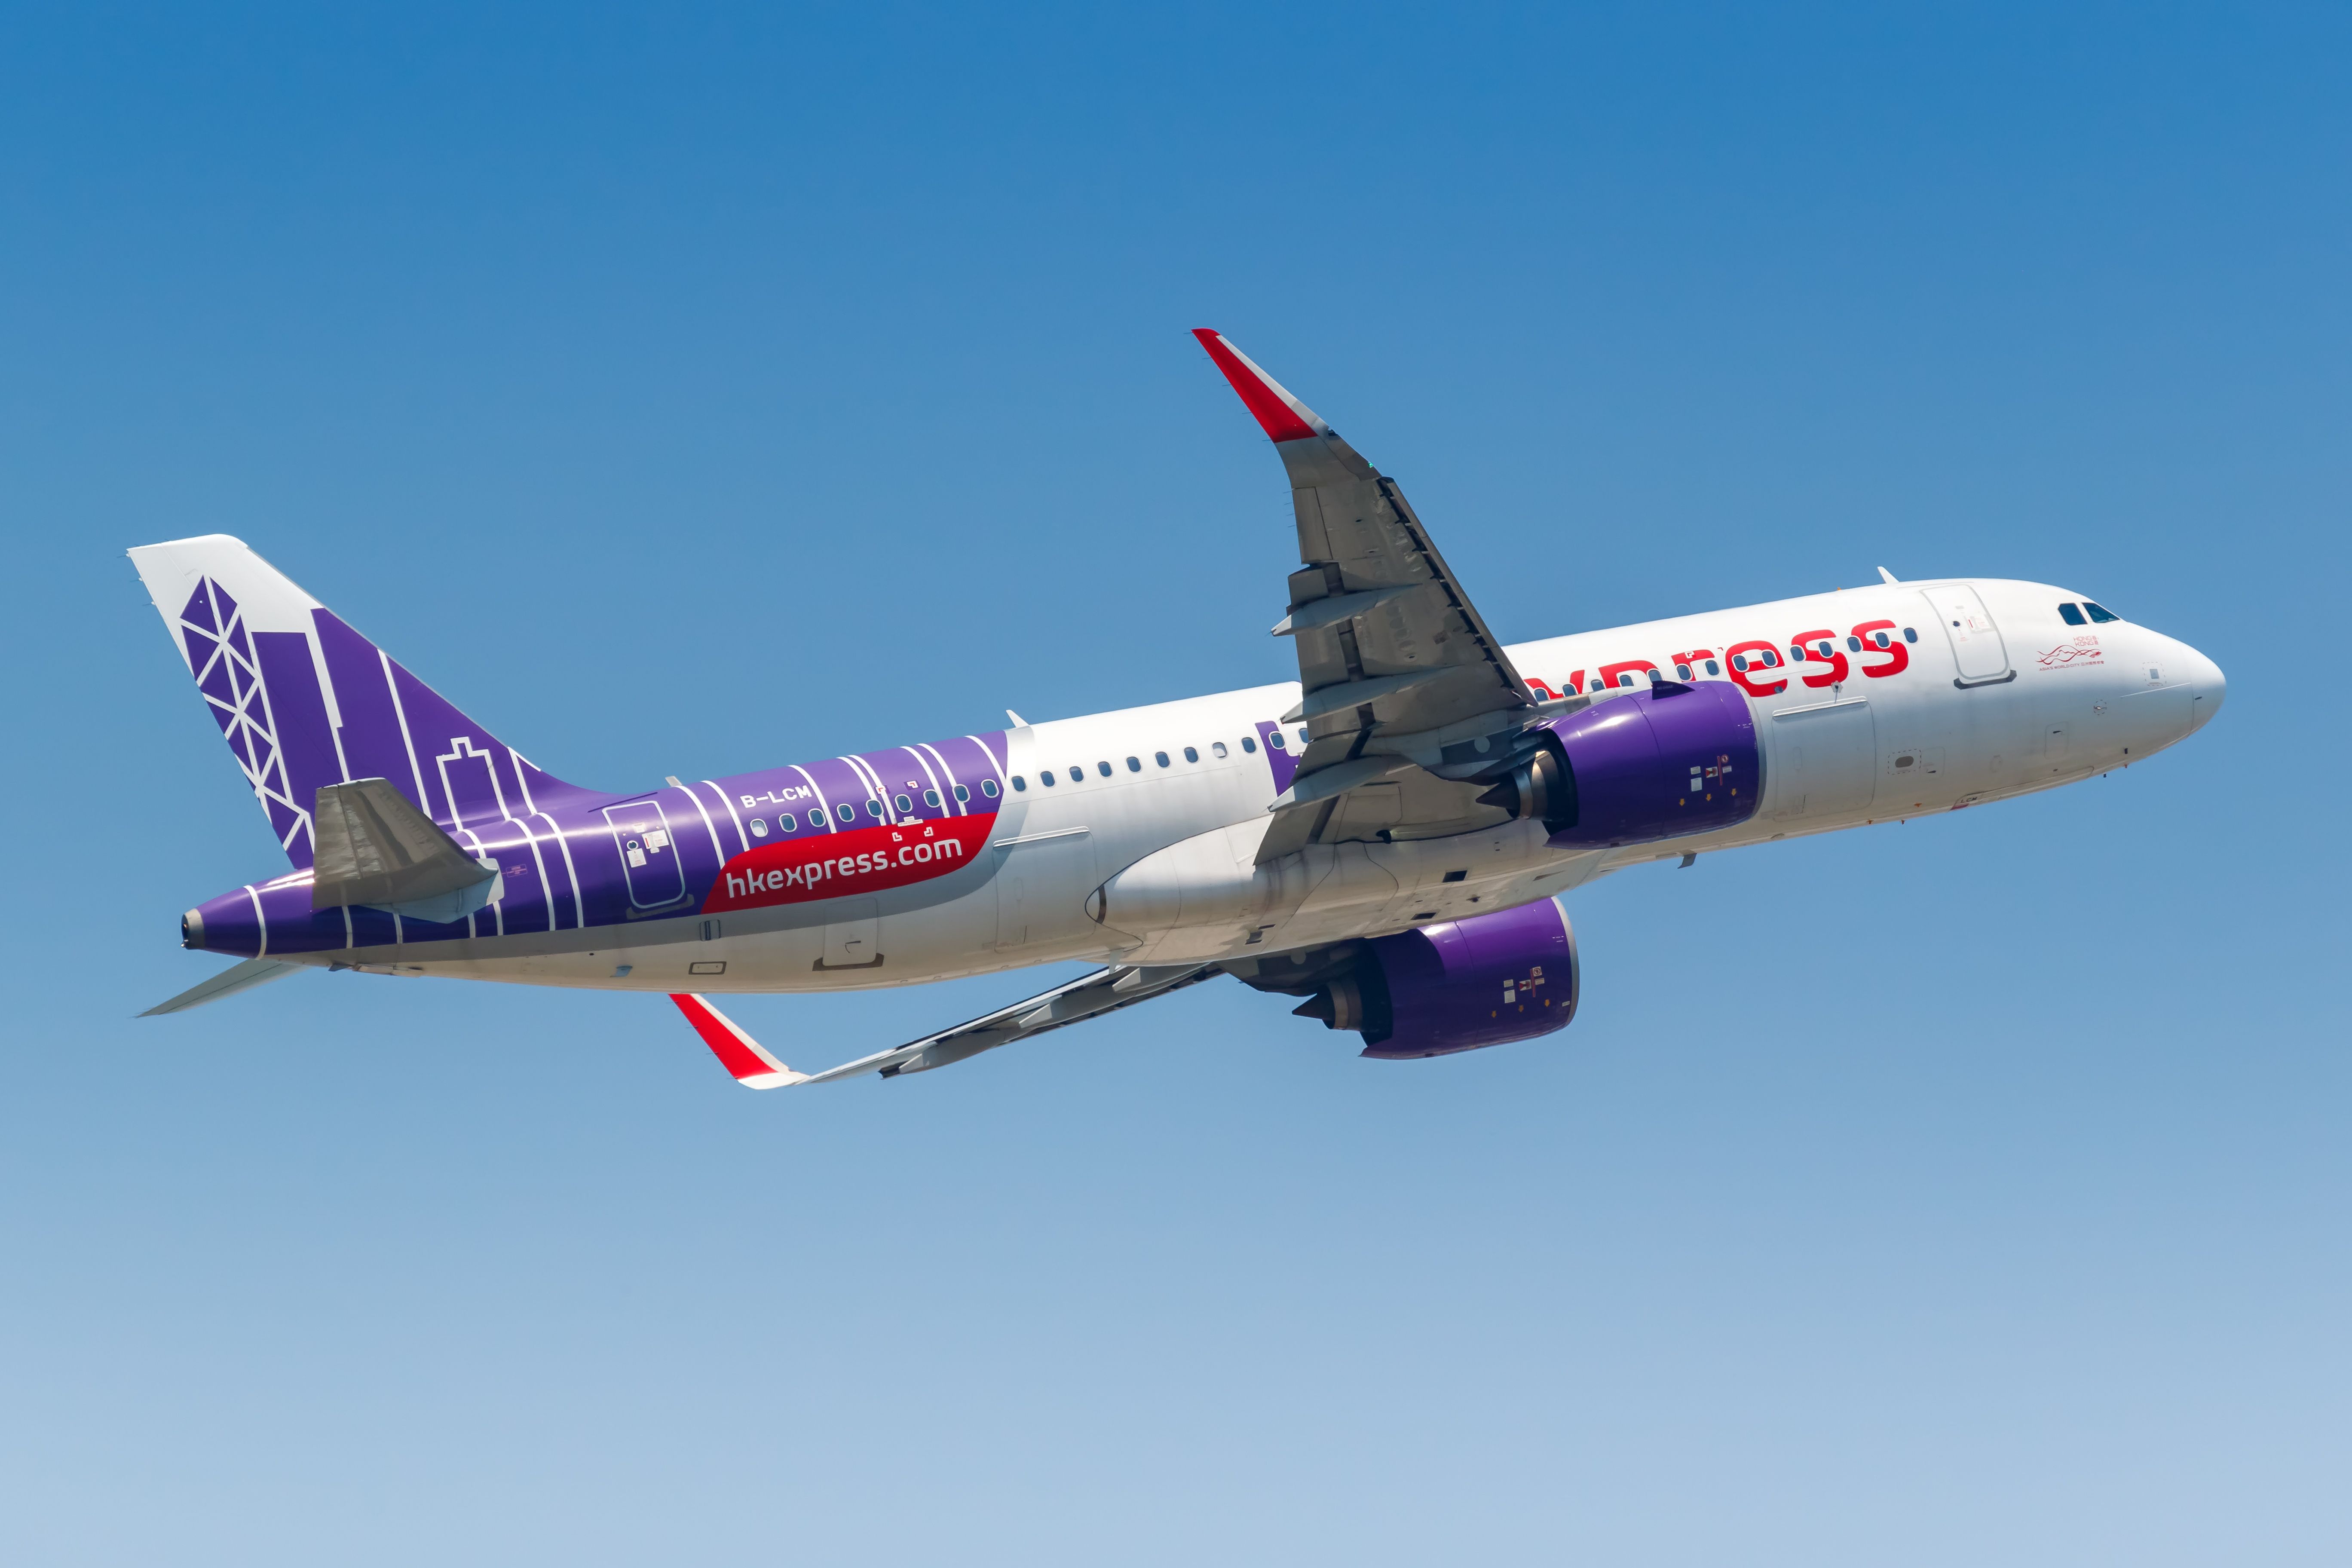 A HK Express Airbus A320neo flying in the sky.